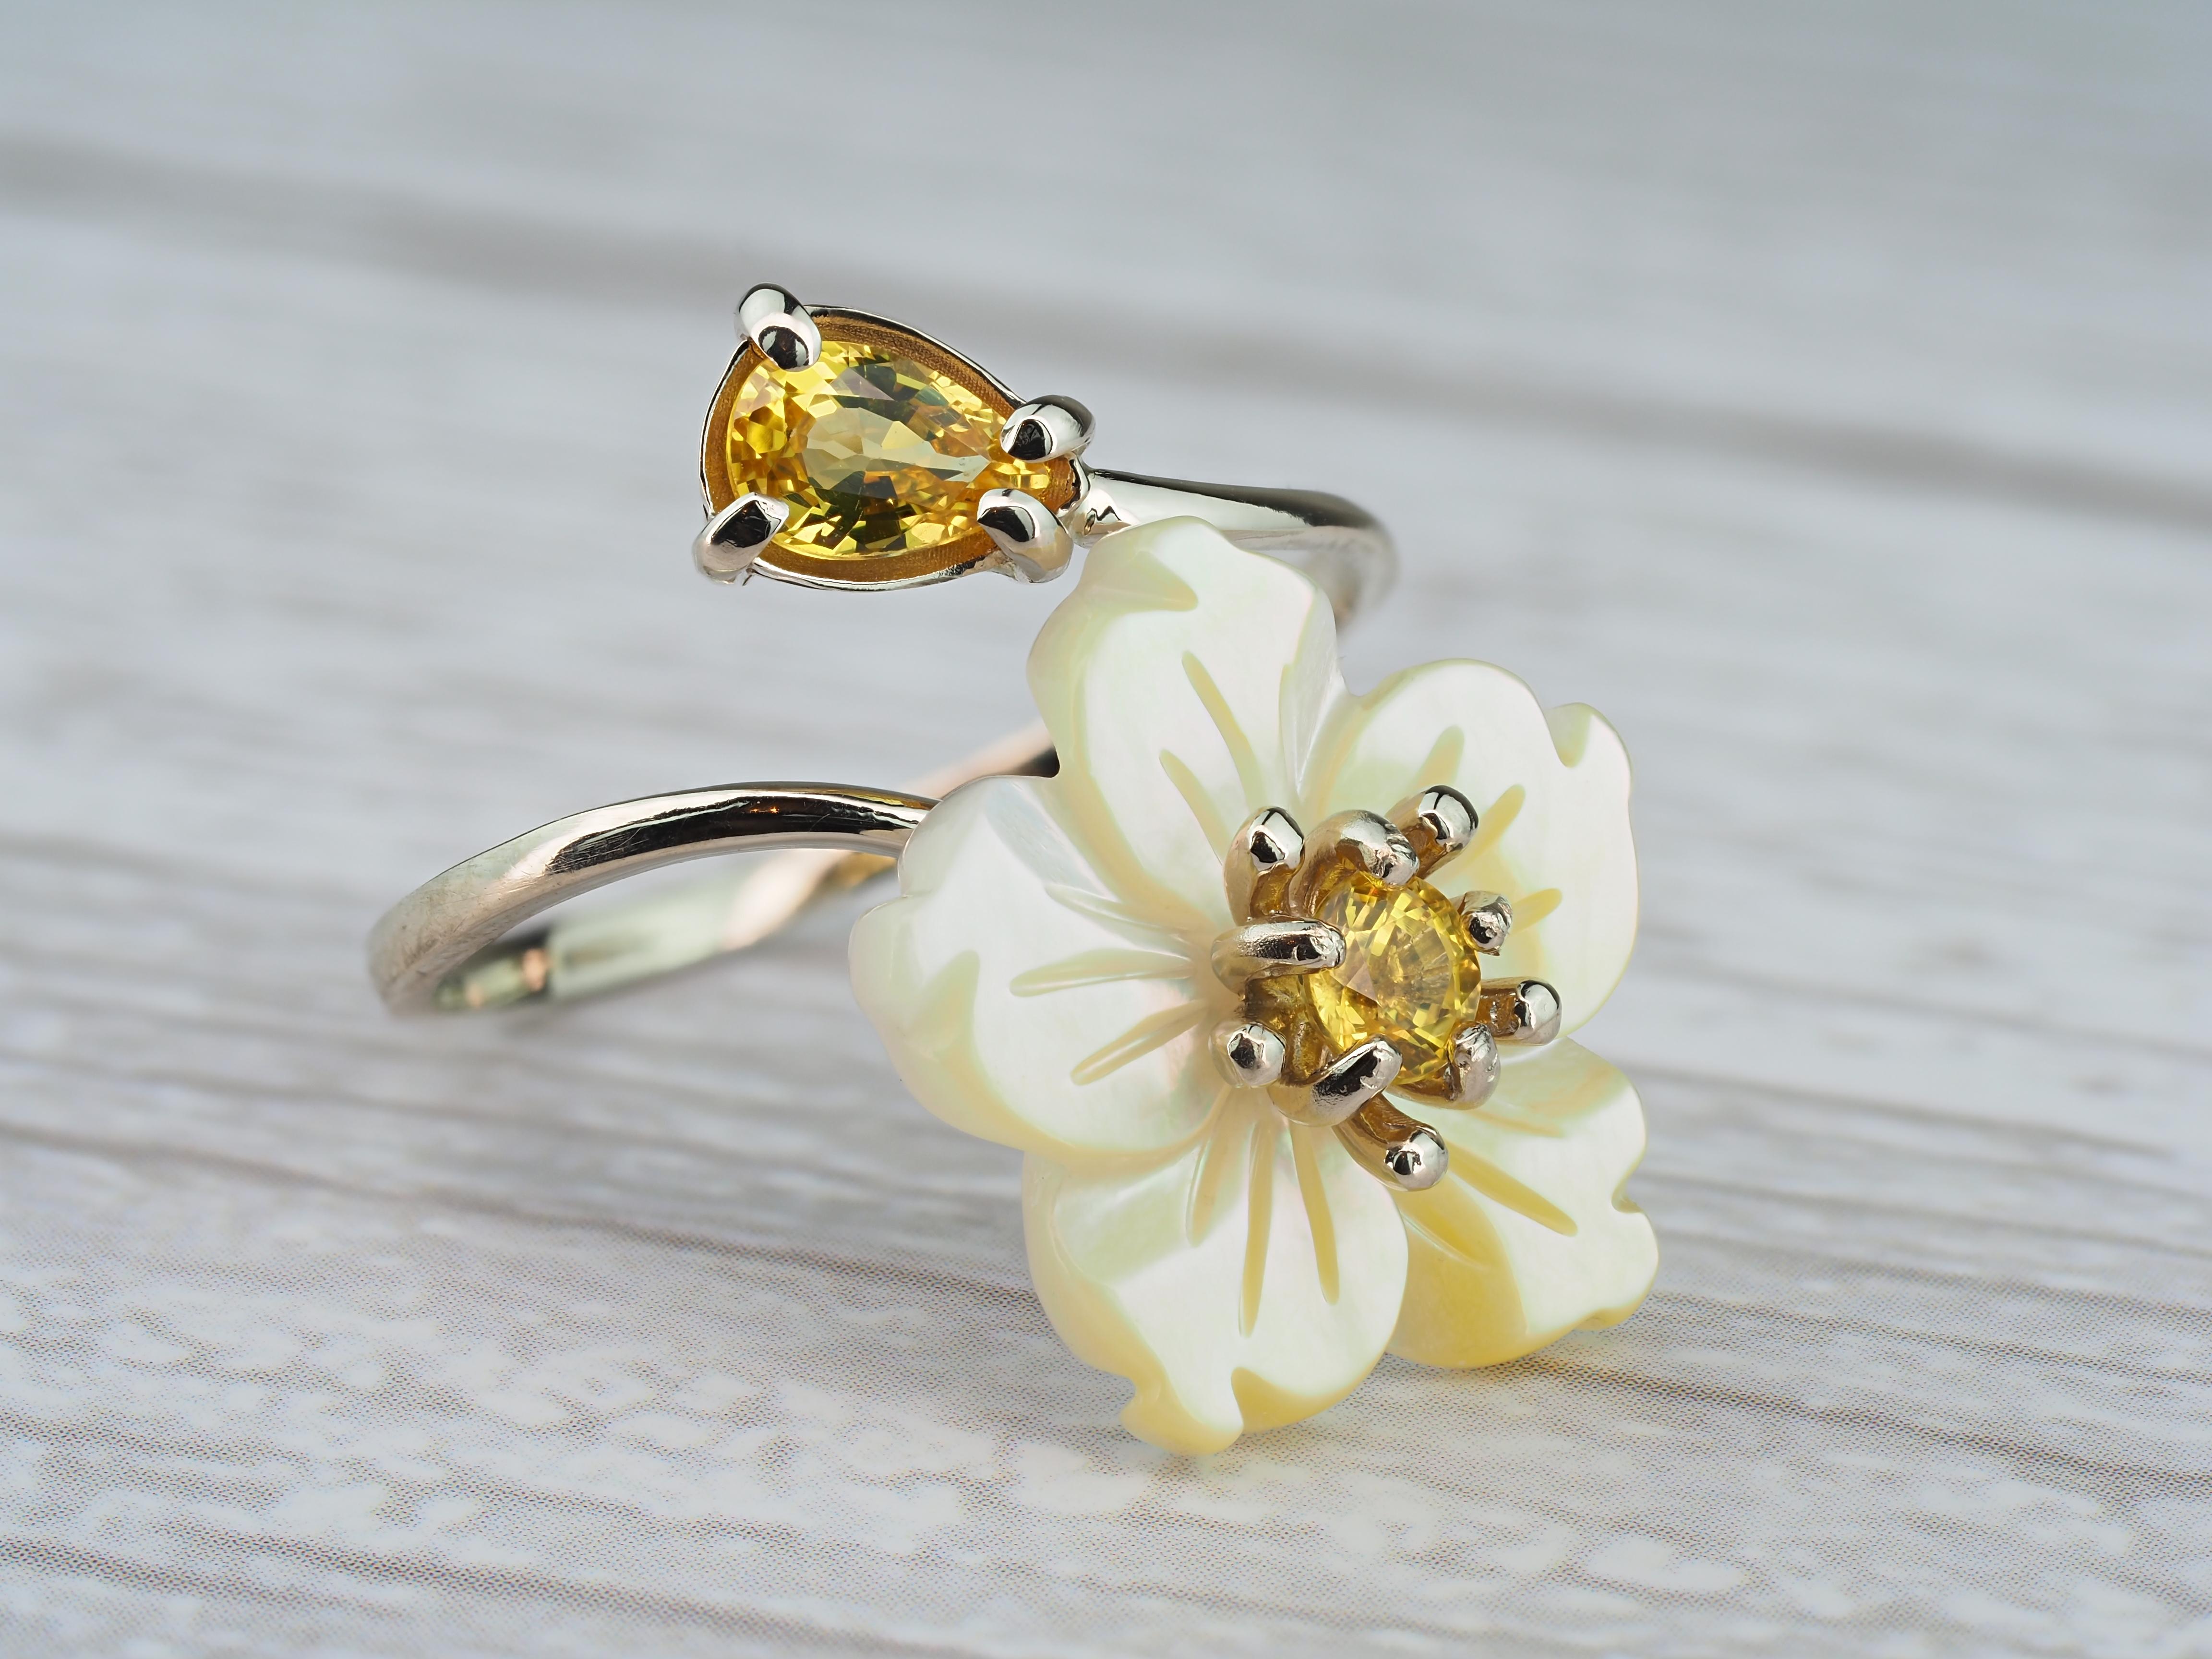 For Sale:  Yellow Sapphire Ring in 14k Gold, Genuine Sapphire Gold Ring 5